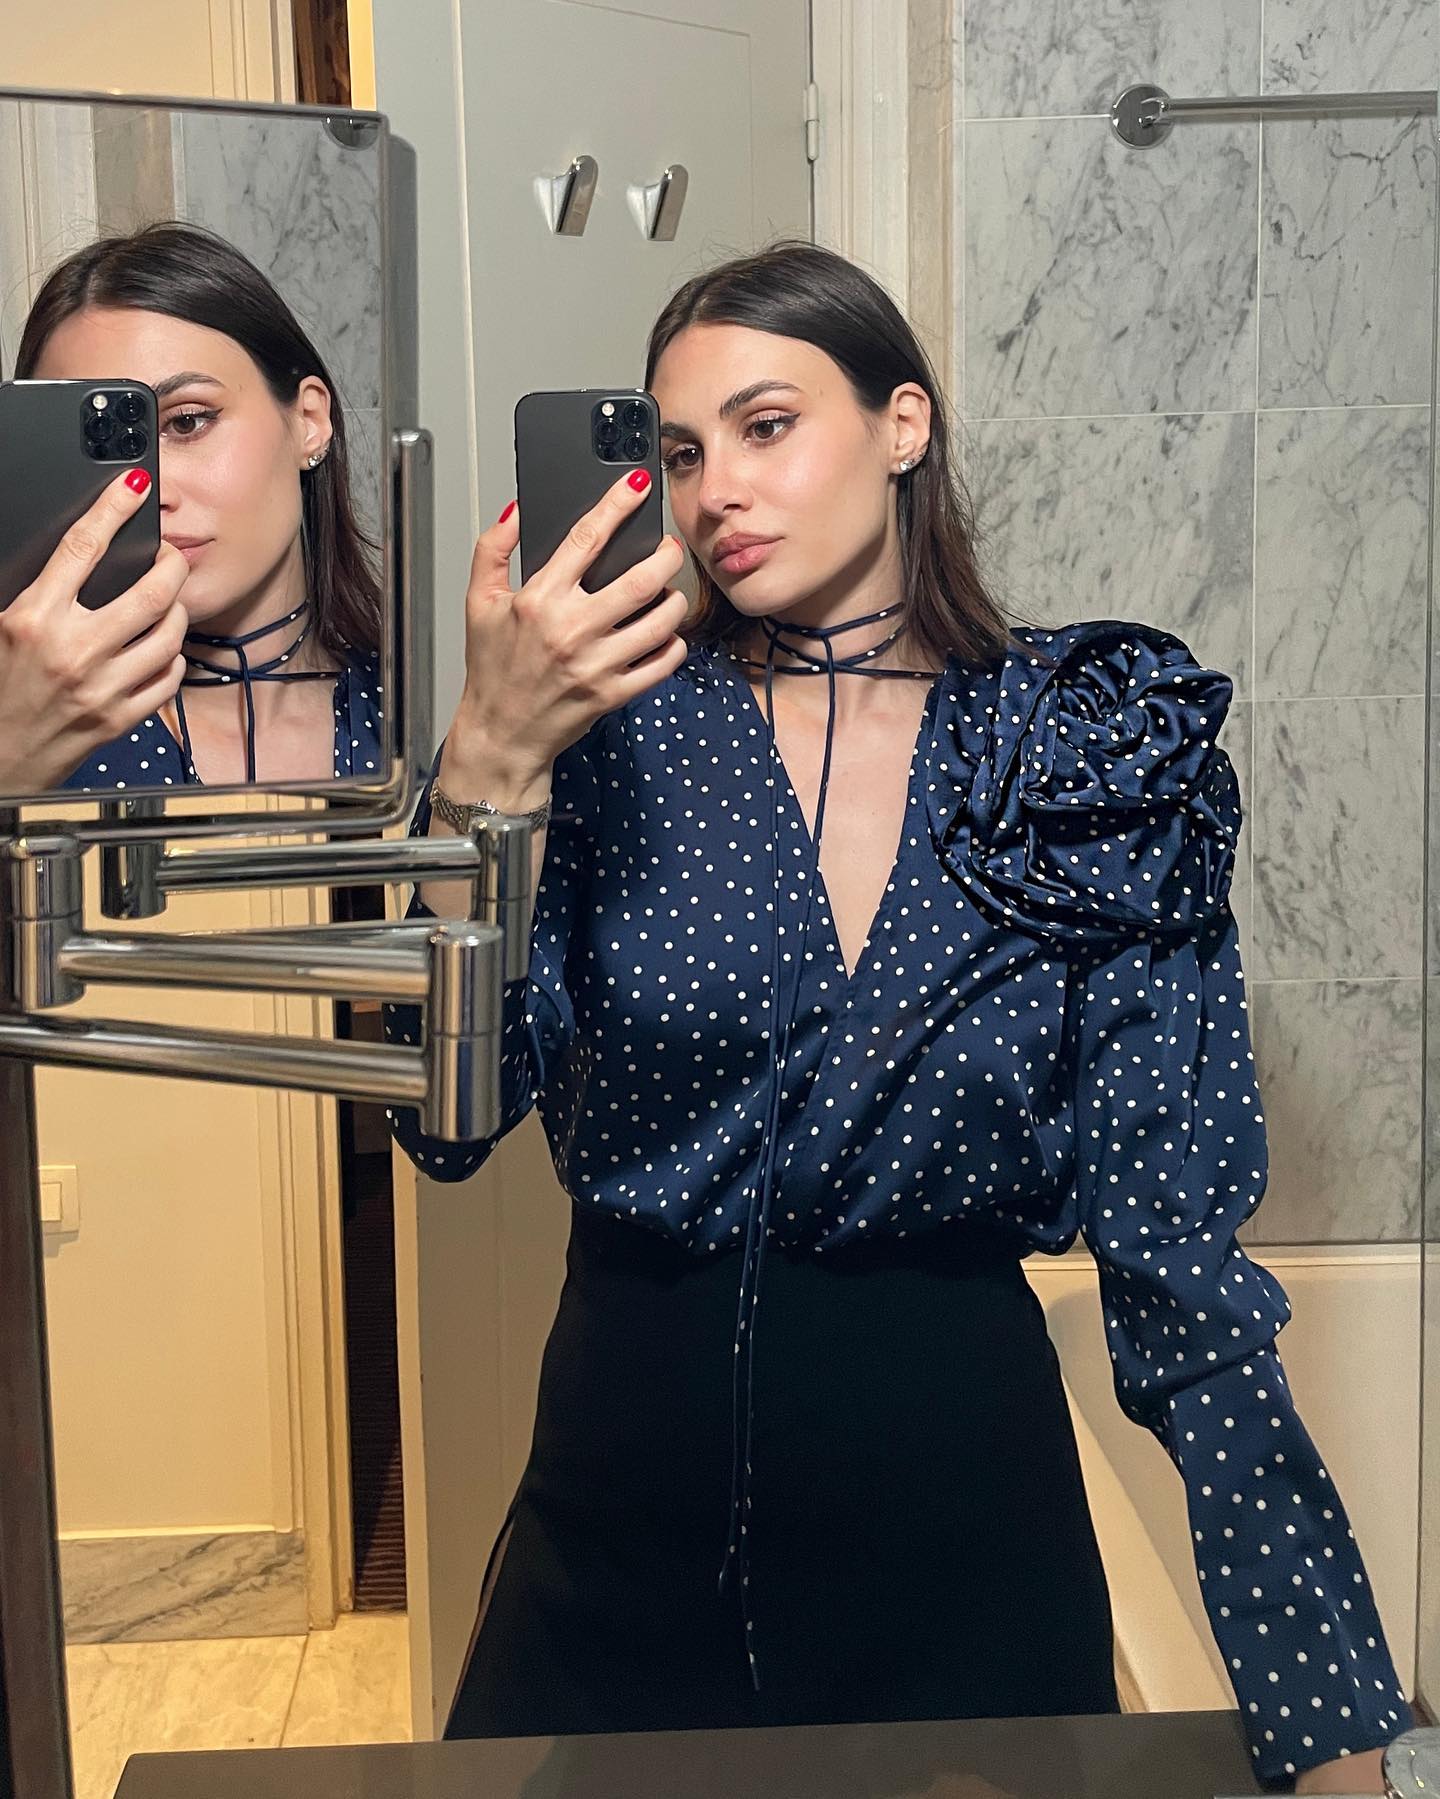 Influencer wears a blouse with elongated cuffs